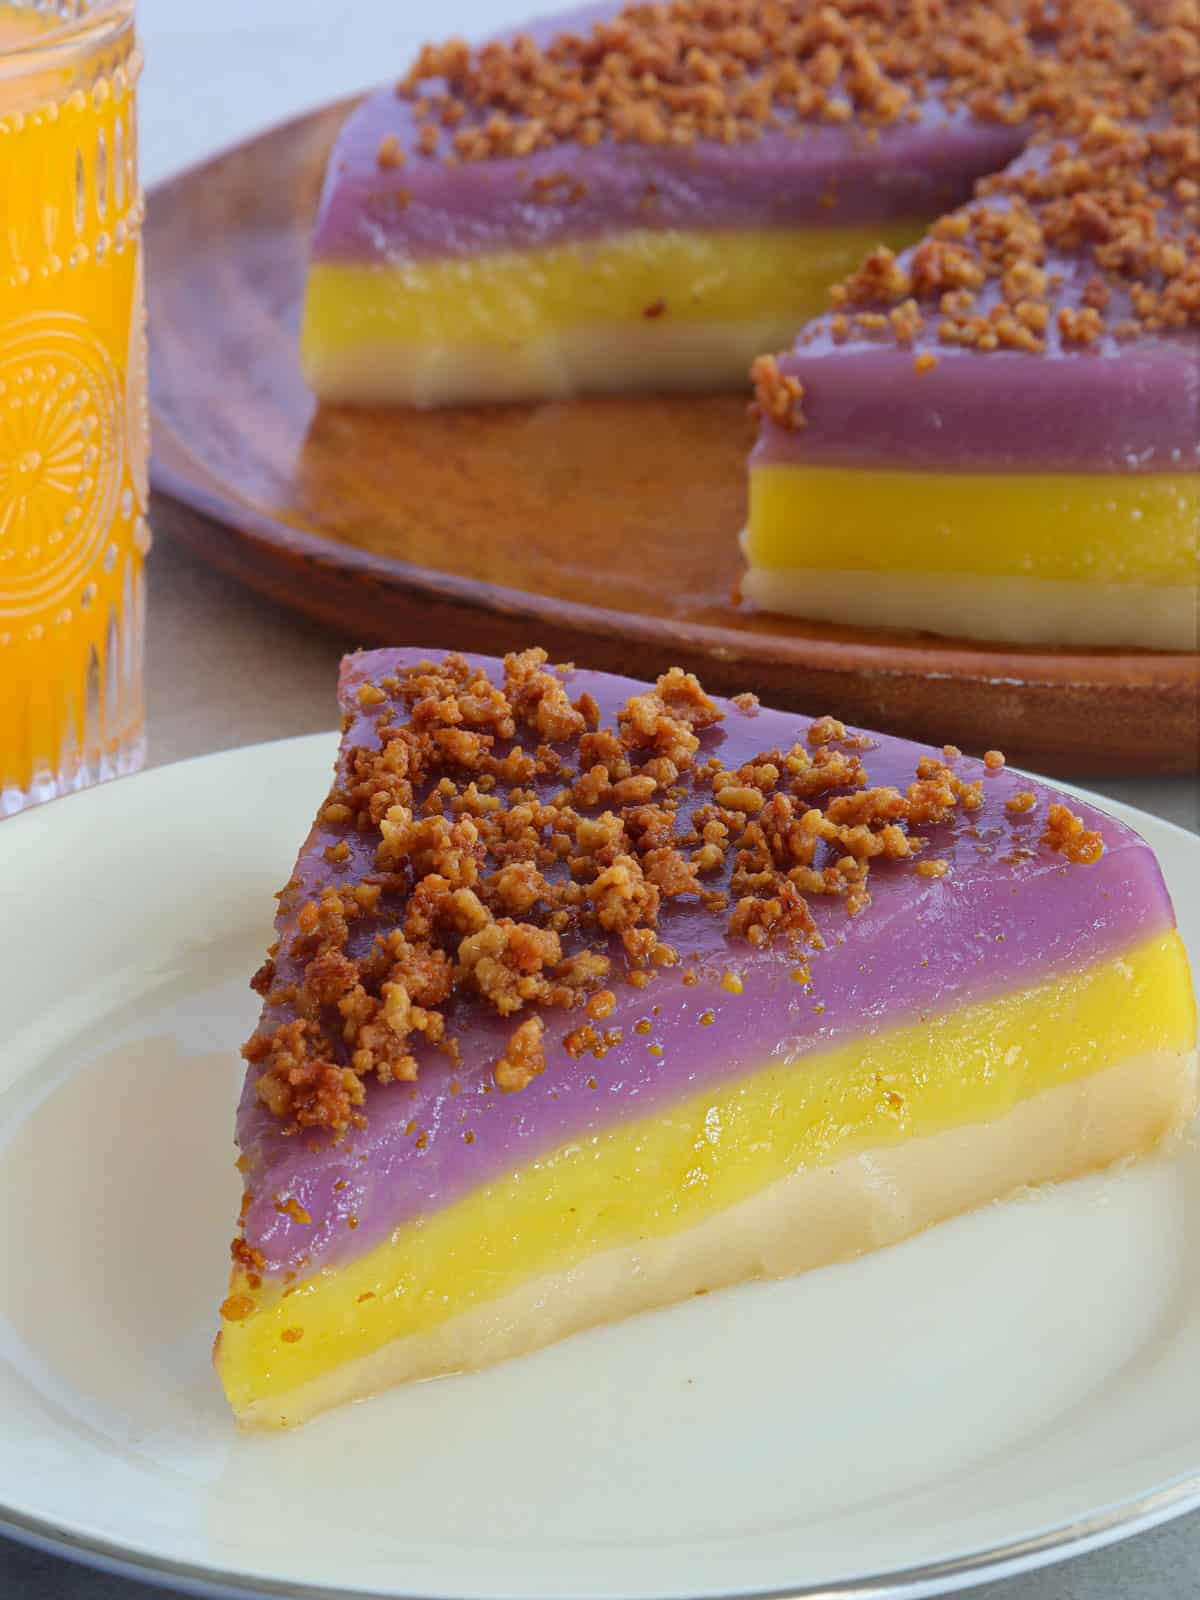 slice of Sapin-Sapin on a white plate with a whole piece on a wooden plate and glass of orange juice in the background.